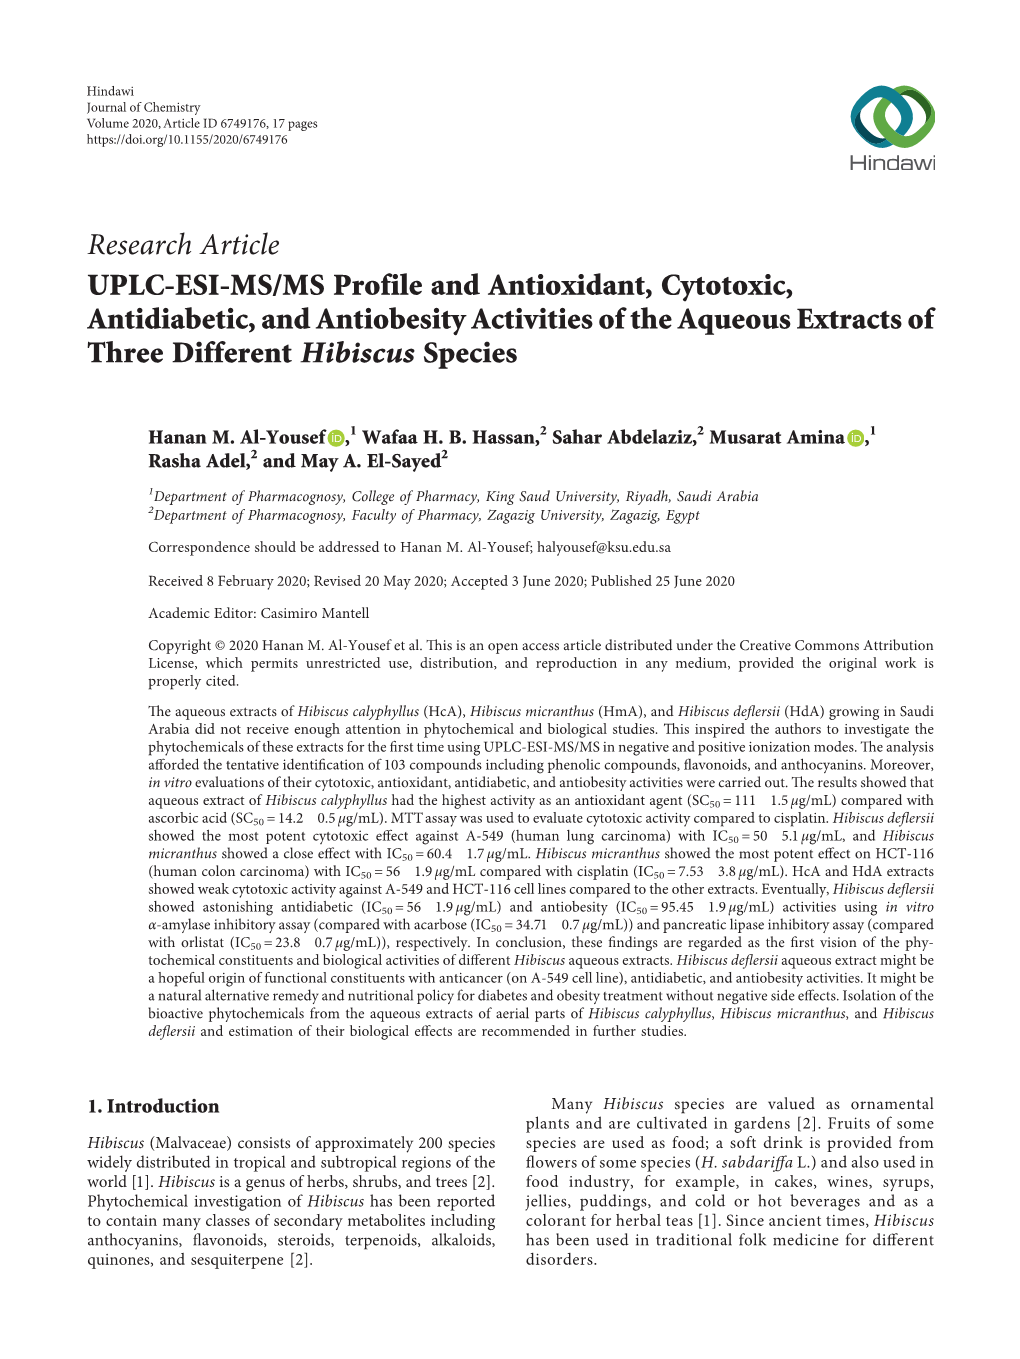 UPLC-ESI-MS/MS Profile and Antioxidant, Cytotoxic, Antidiabetic, and Antiobesity Activities of the Aqueous Extracts of Three Different Hibiscus Species